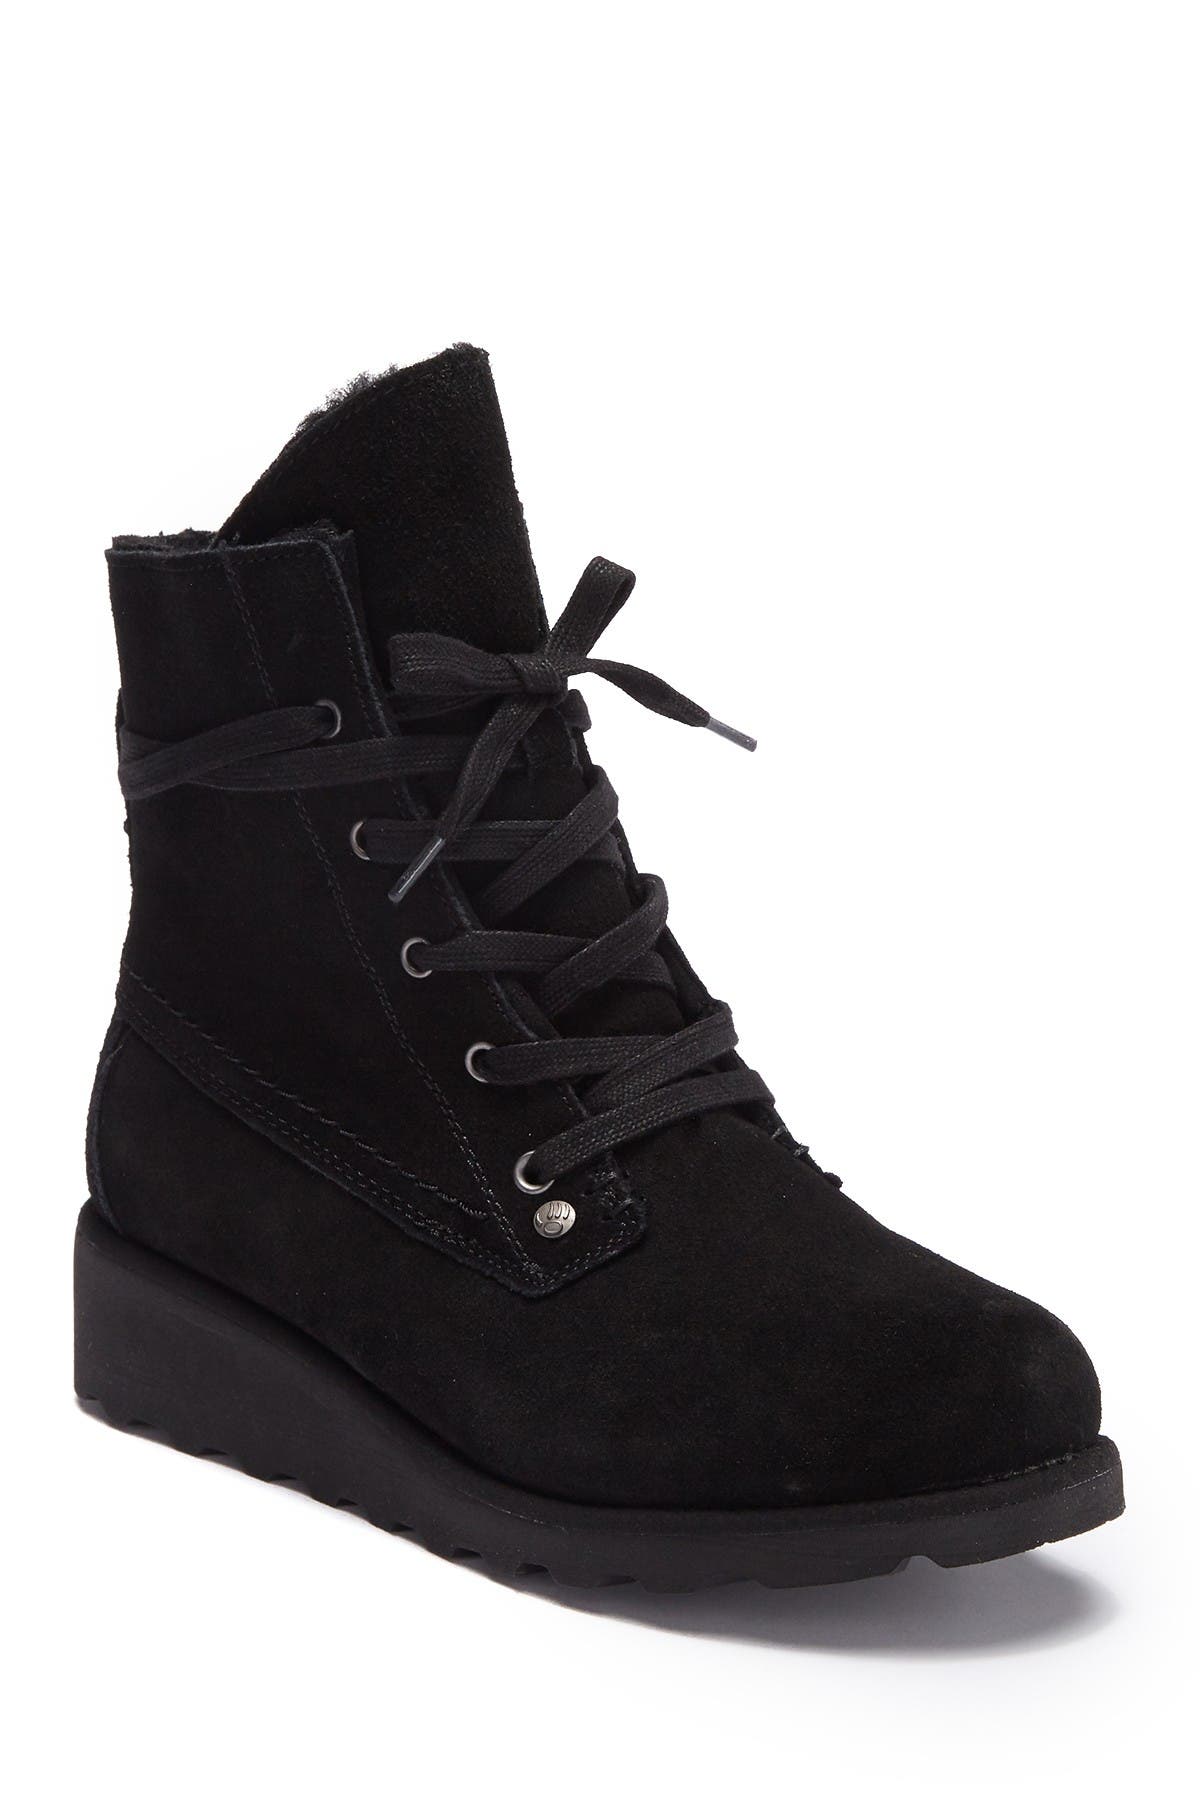 bearpaw boots with laces